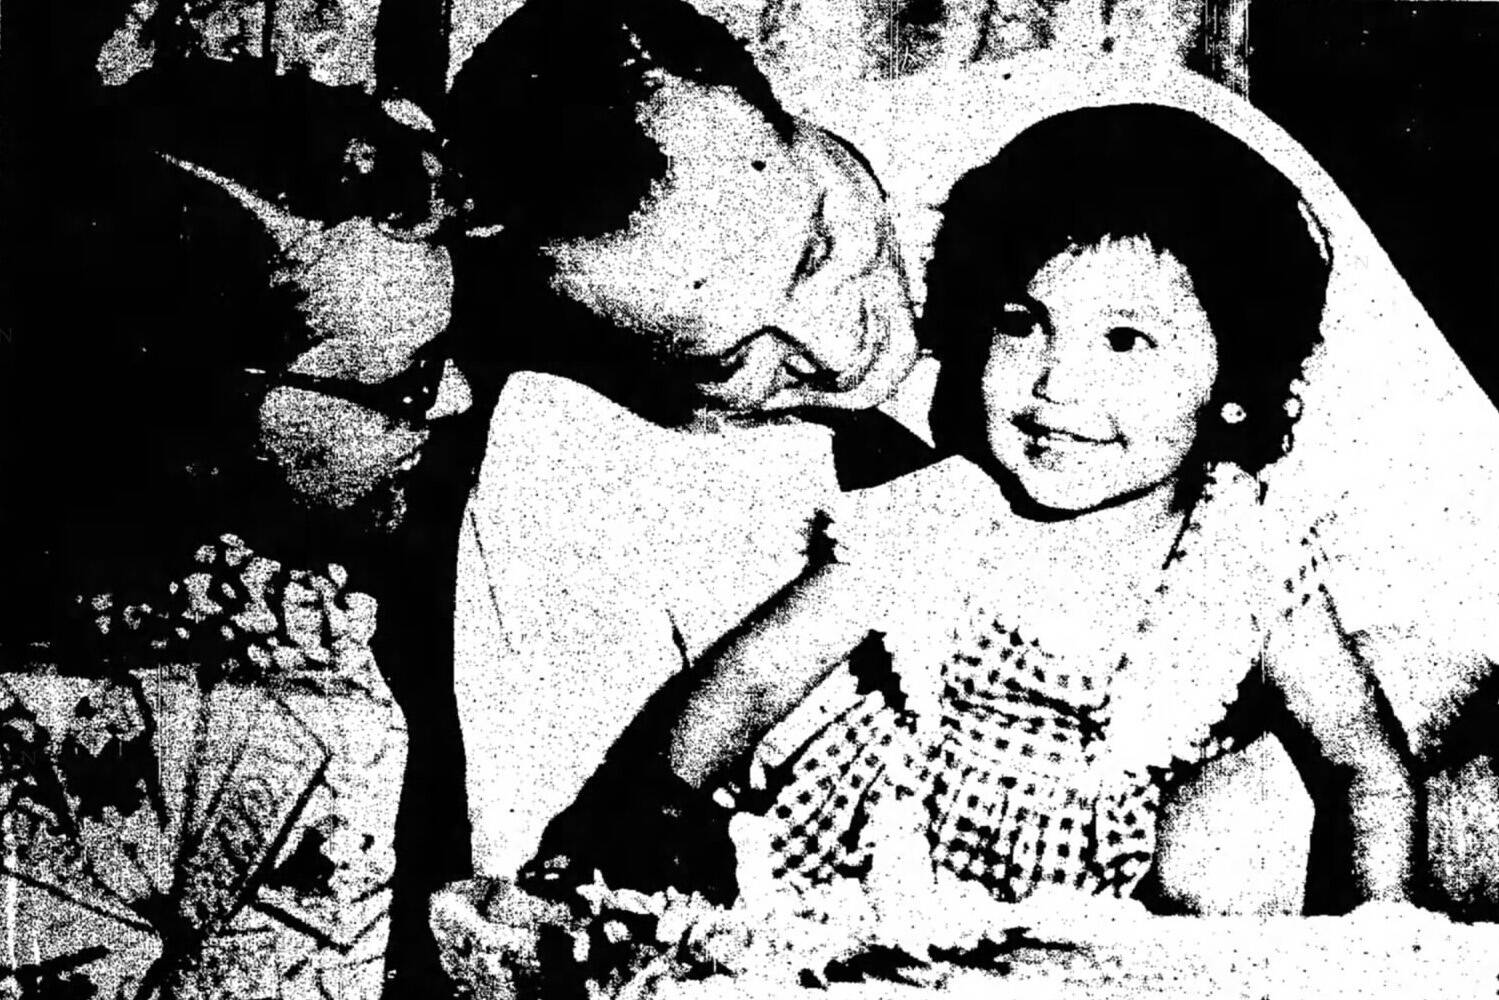 Ruth Ann and Oscar Pederson share smiles with young Vicky, a foster daughter they were trying to adopt in 1954. This front-page photograph appeared in the Fairbanks Daily News-Miner on June 17, 1954.